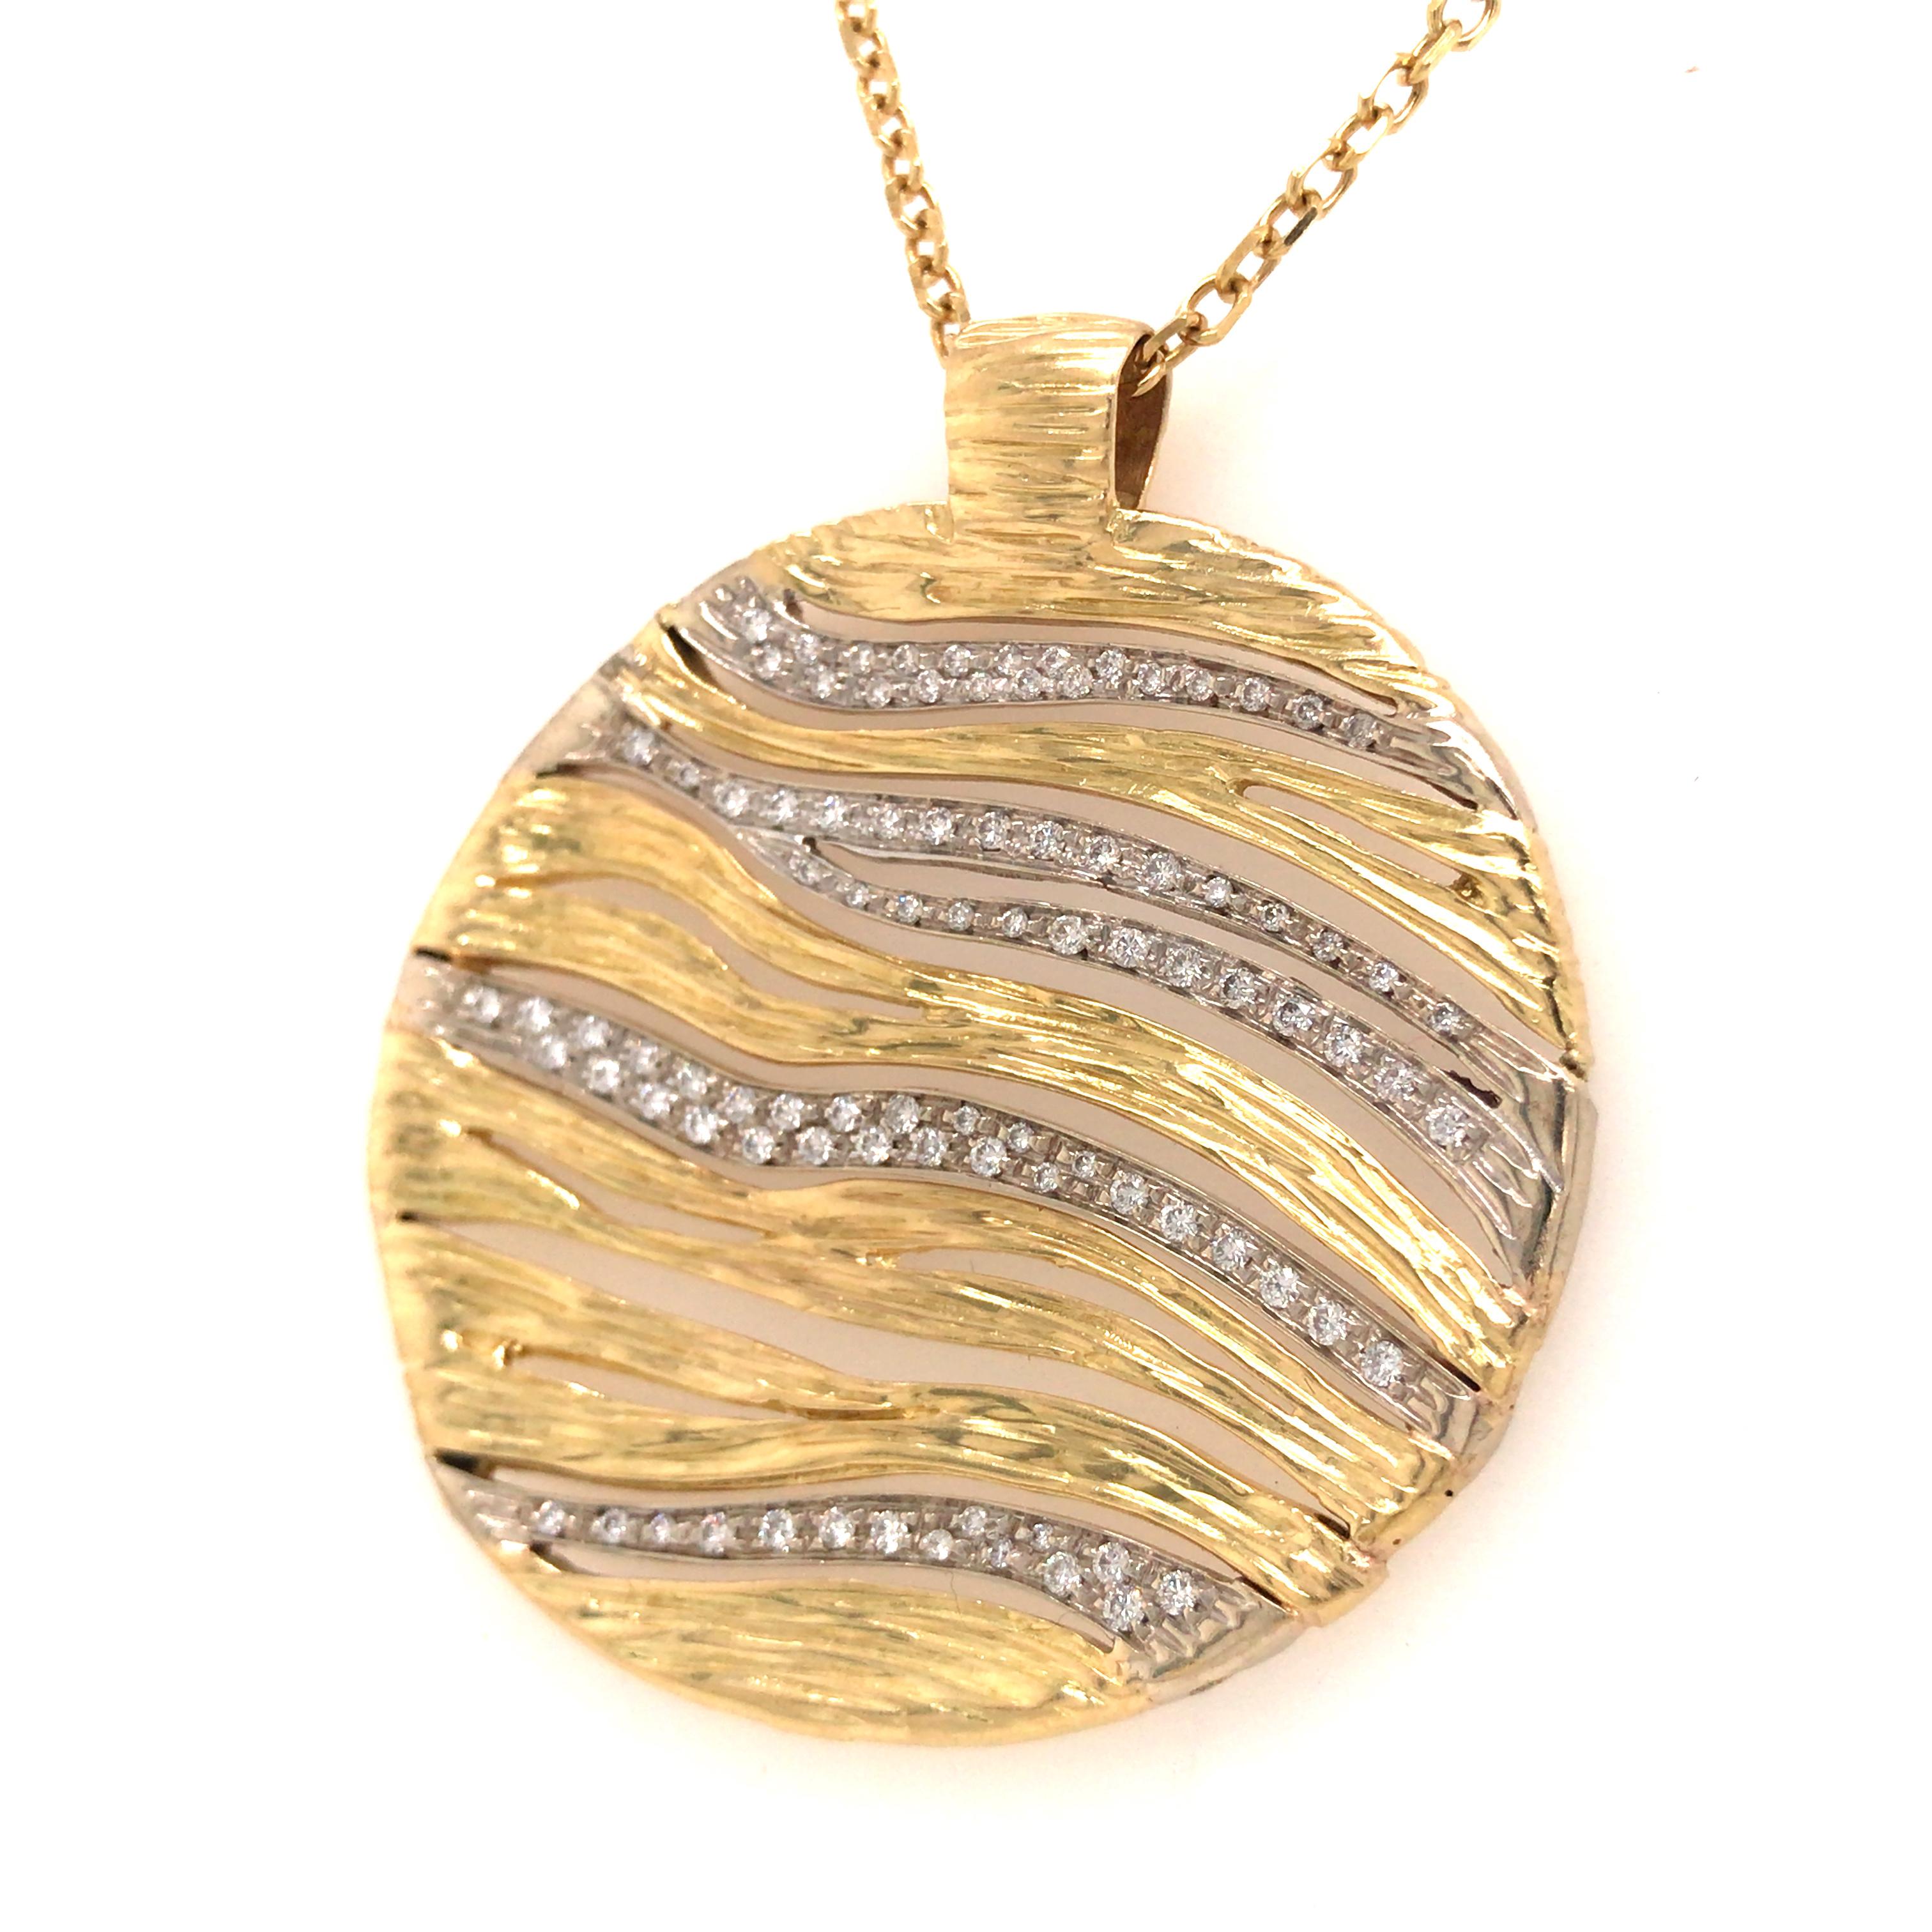 Roberto Coin Diamond and Gold Medallion Pendant in 18K Yellow Gold.  (92) Round Brilliant Cut Diamonds weighing 0.80 carat total weight, G-H in color and VS in clarity are expertly set in a wave pattern with textured Gold.  The Pendant measures 1